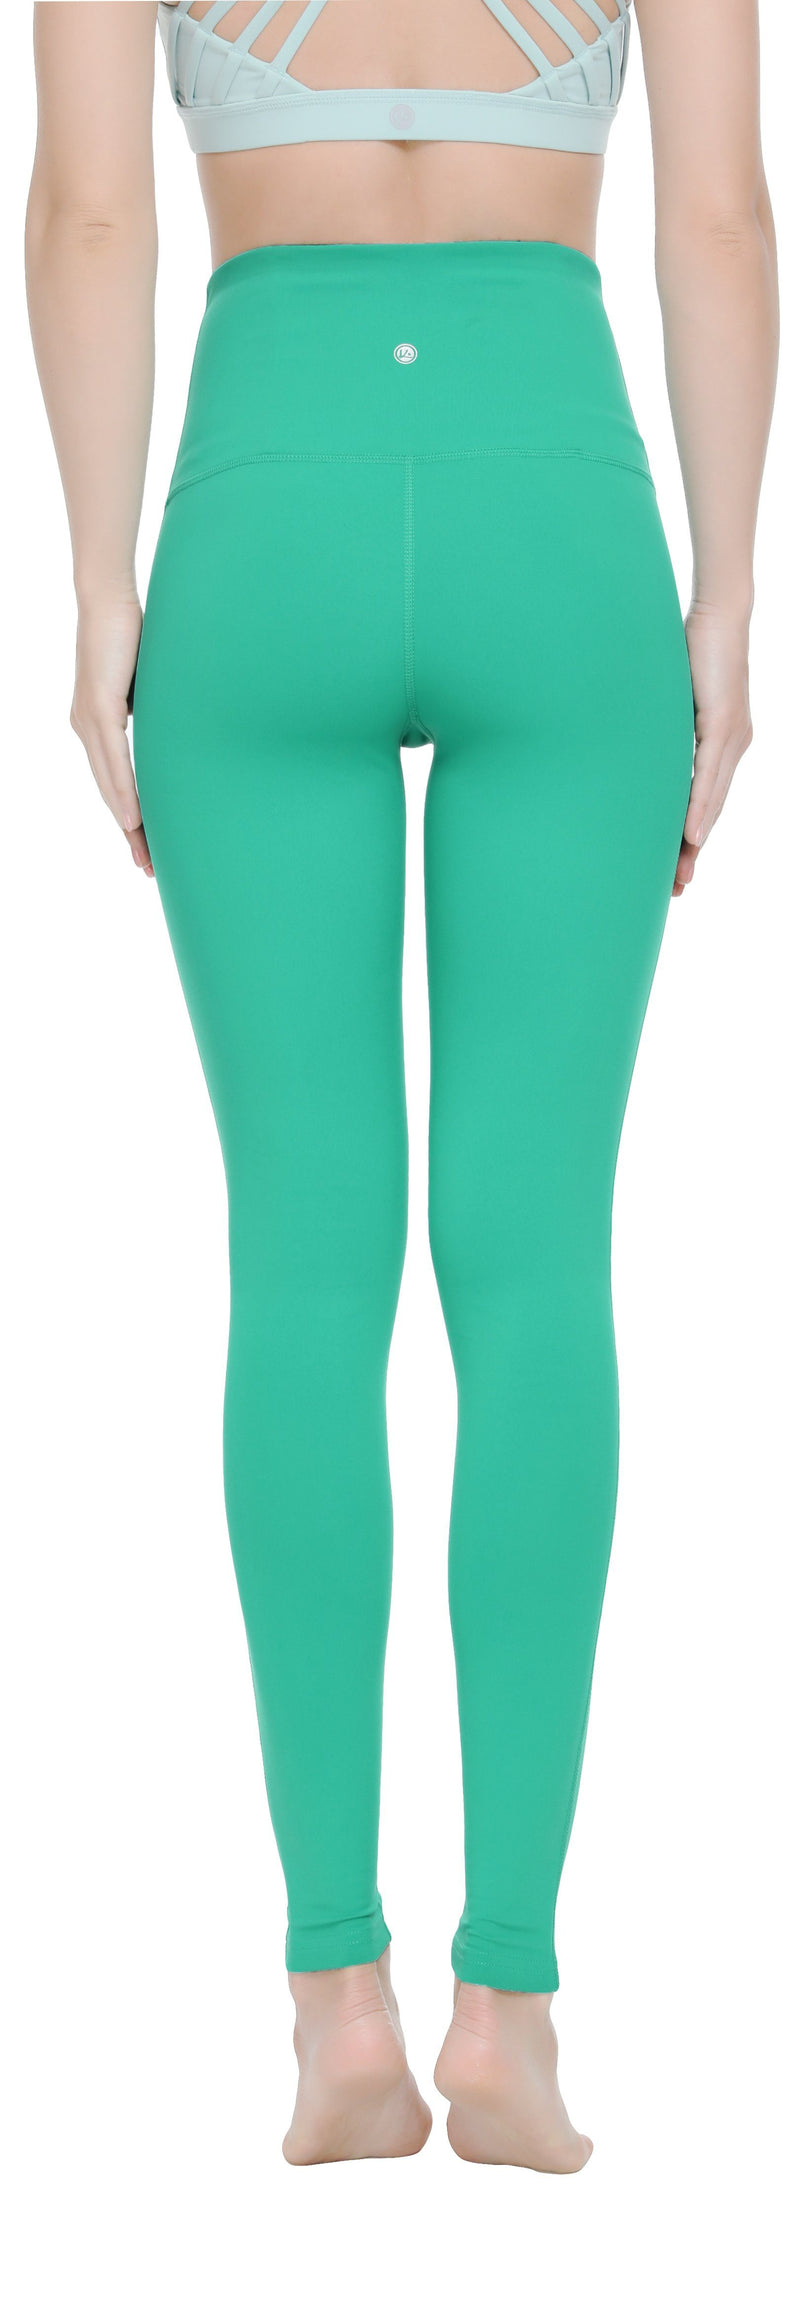 High Waisted Pastel True Teal Leggings Yoga Pants for Women With Pockets, Tummy  Control, Quality Fabric, 28 -  Canada